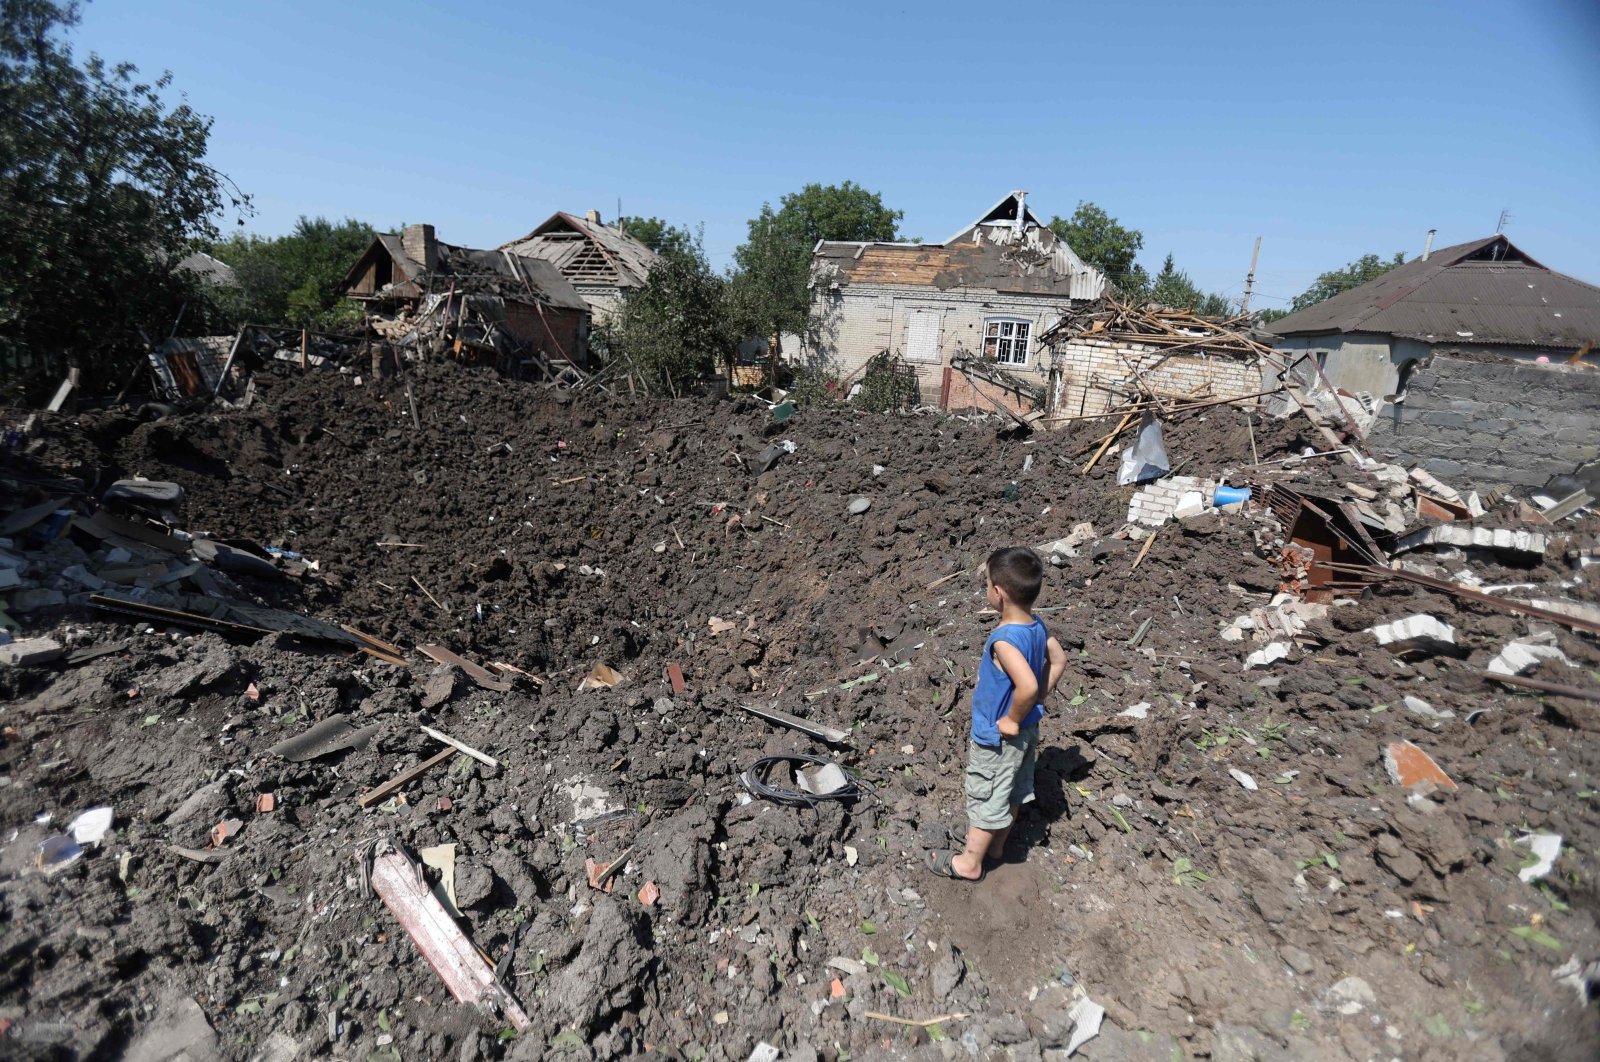 A boy looks at a crater following a strike in the village of Druzhkivka, Donetsk region, Ukraine, Aug. 17, 2022. (AFP Photo)